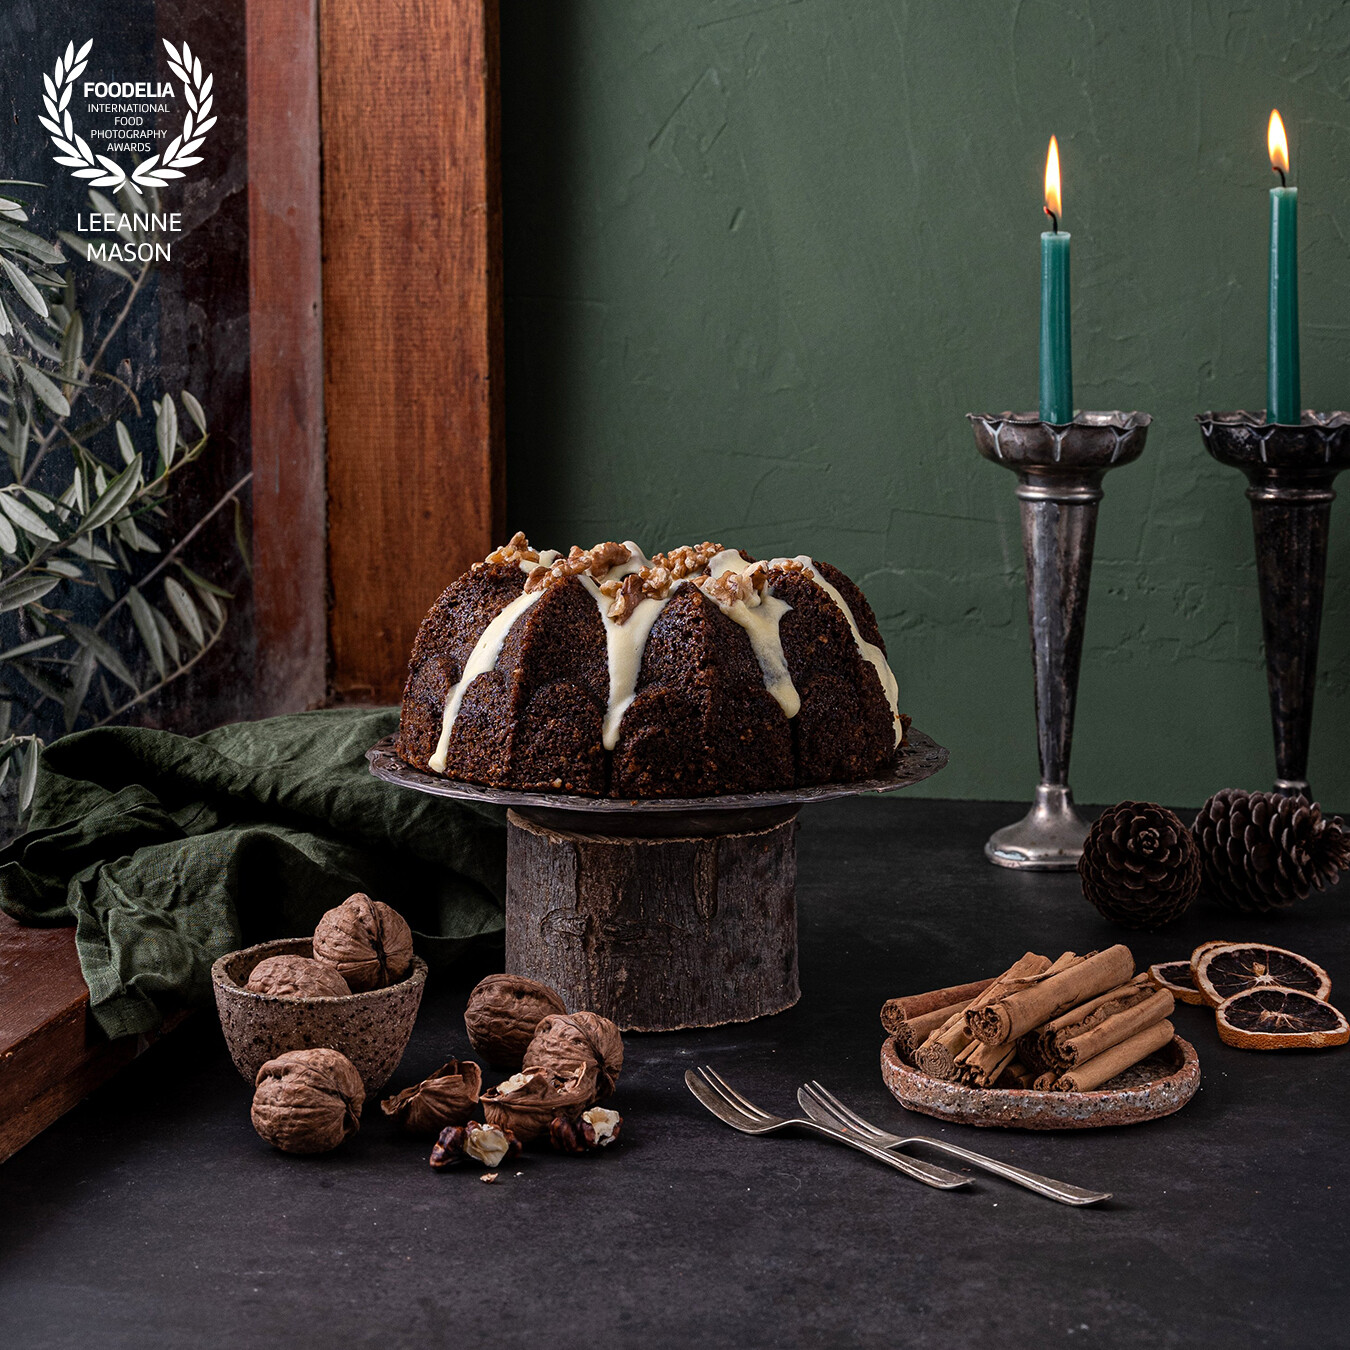 I found an old window in its frame at the recycling center and a friend gave me some olive branches from her olive tree which both were used to create this scene. I angled my Godox AD300 through a scrim to emulate winter window light and to illuminate this delicious Spiced Carrot and Walnut Bundt Cake.